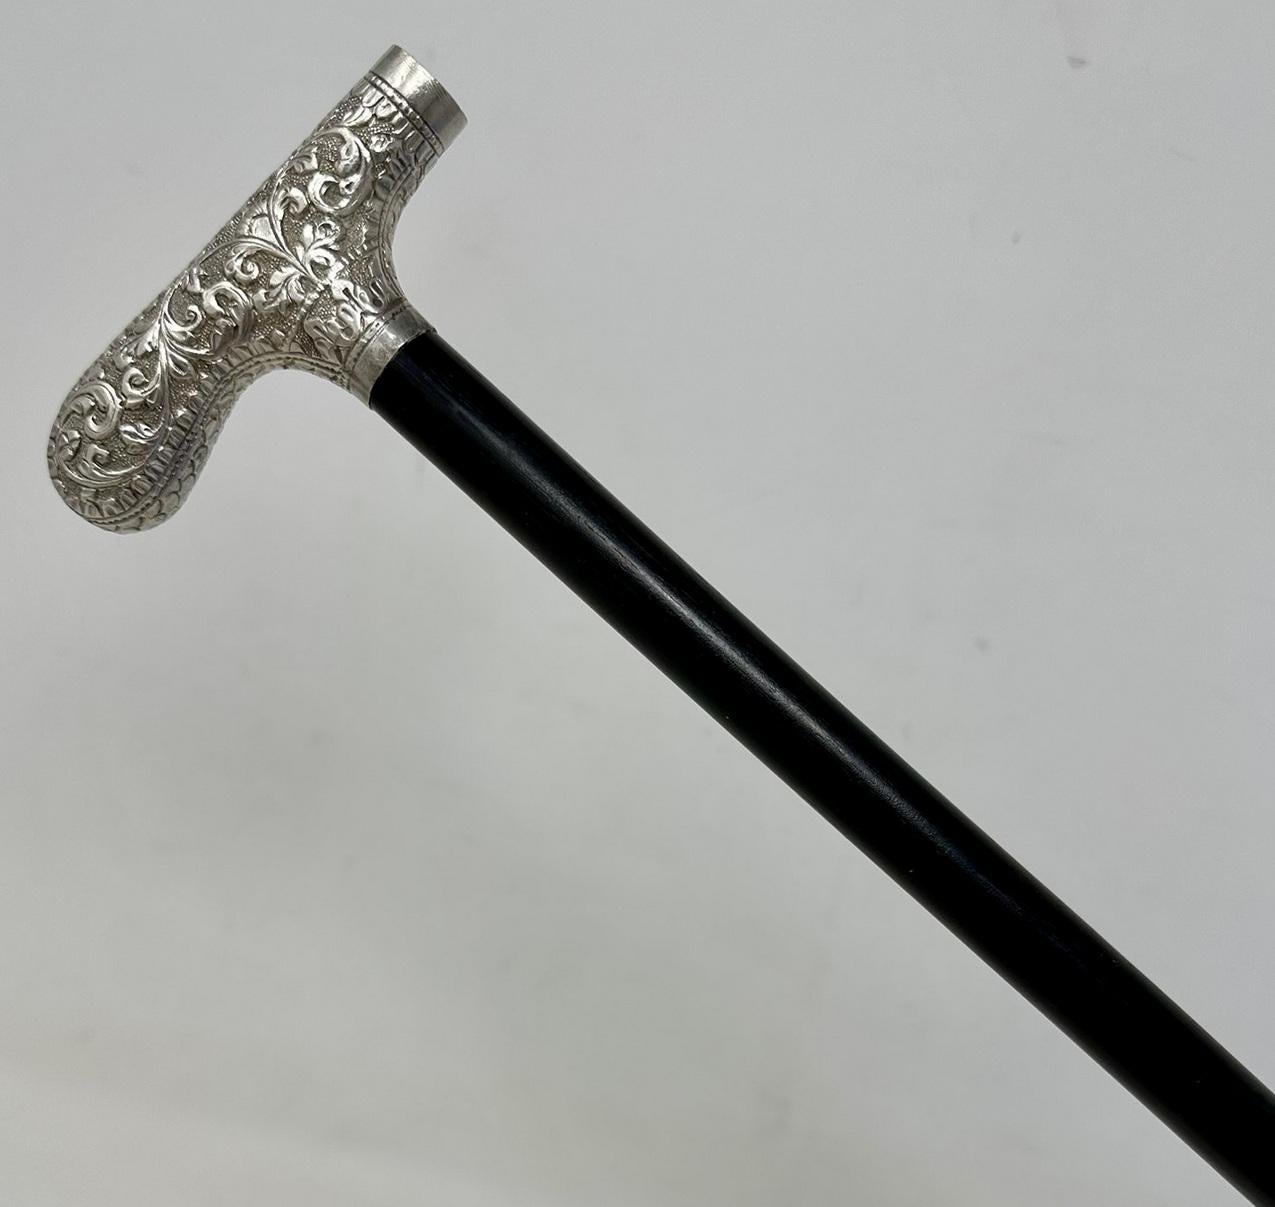 Stylish Solid Polished Ebonised Wood and Sterling Silver Lady’s Walking Stick Dress Cane with Traditional ornately cast Tau shaped handle in Art Nouveau style, of French or English origin, complete with its original bi-metal polished ferrule, which